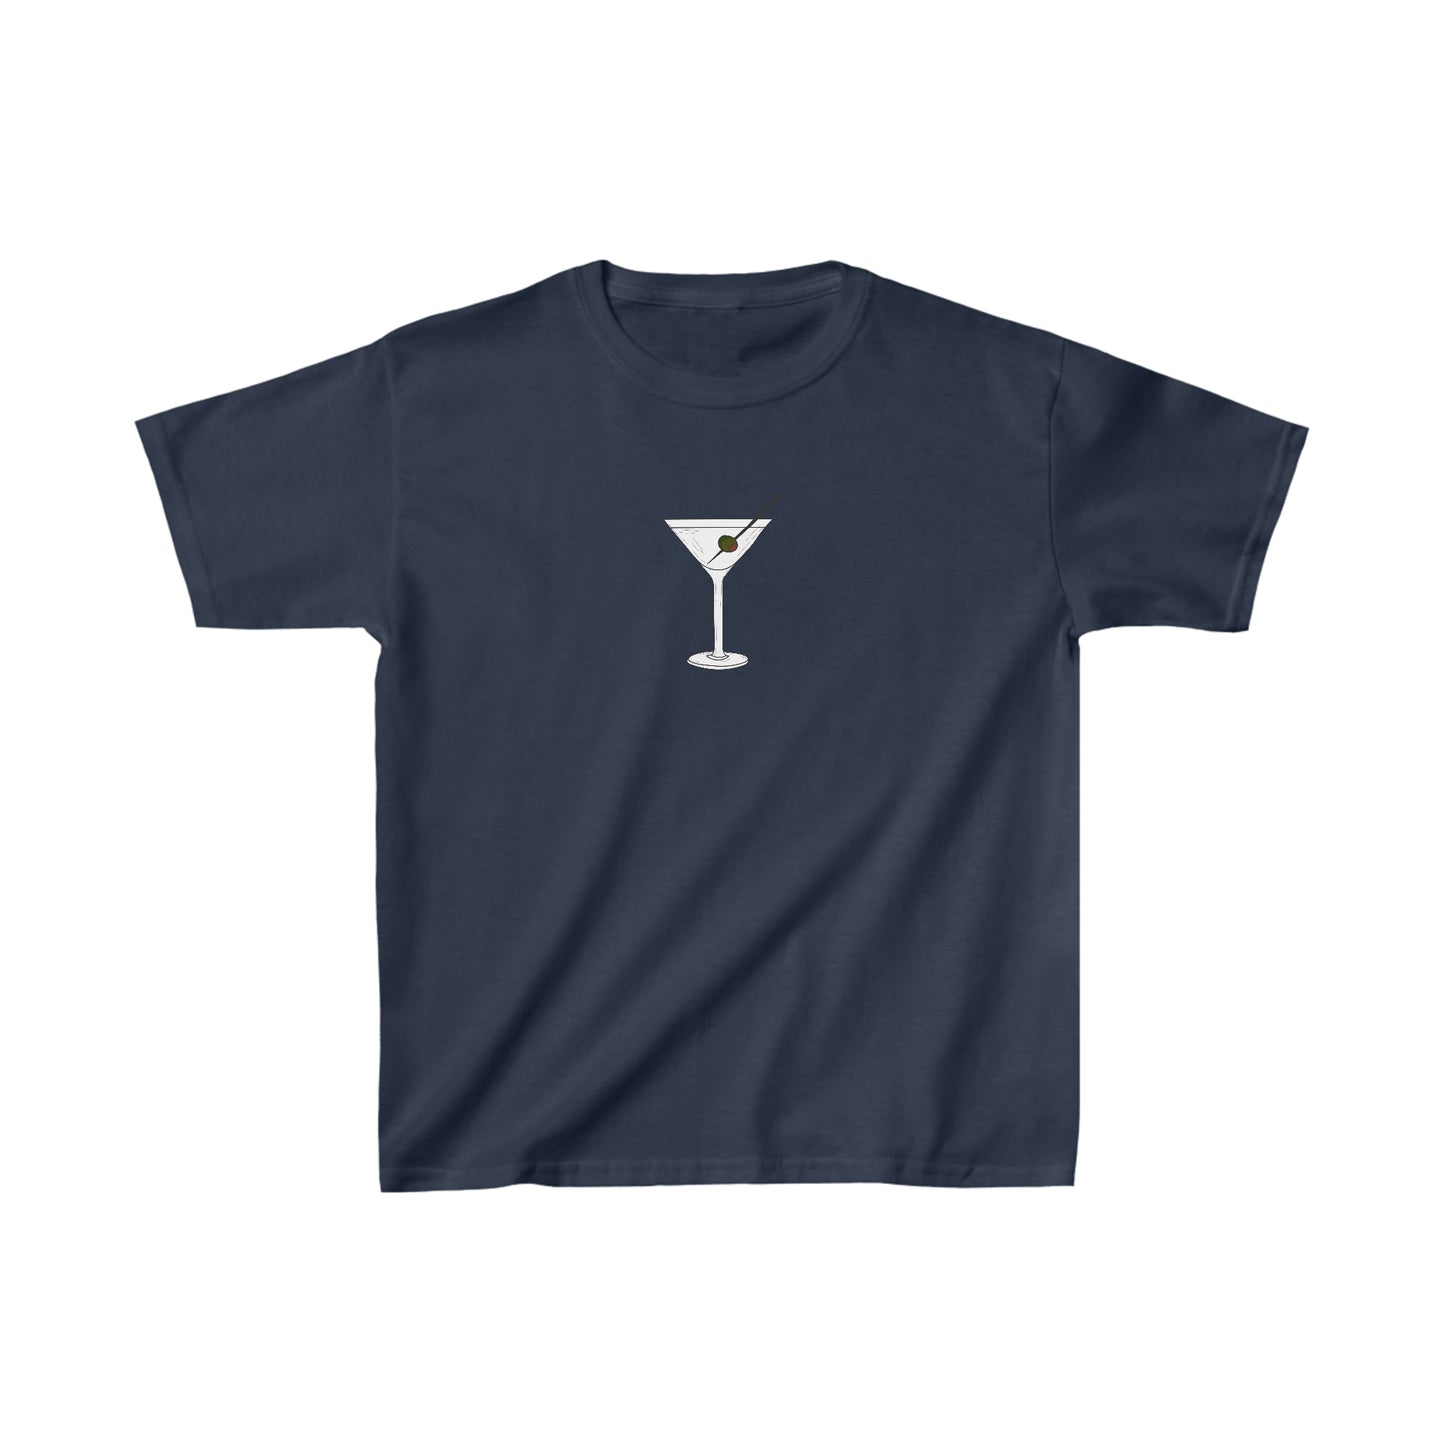 Dirty Martini Boxy Fit Baby Tee